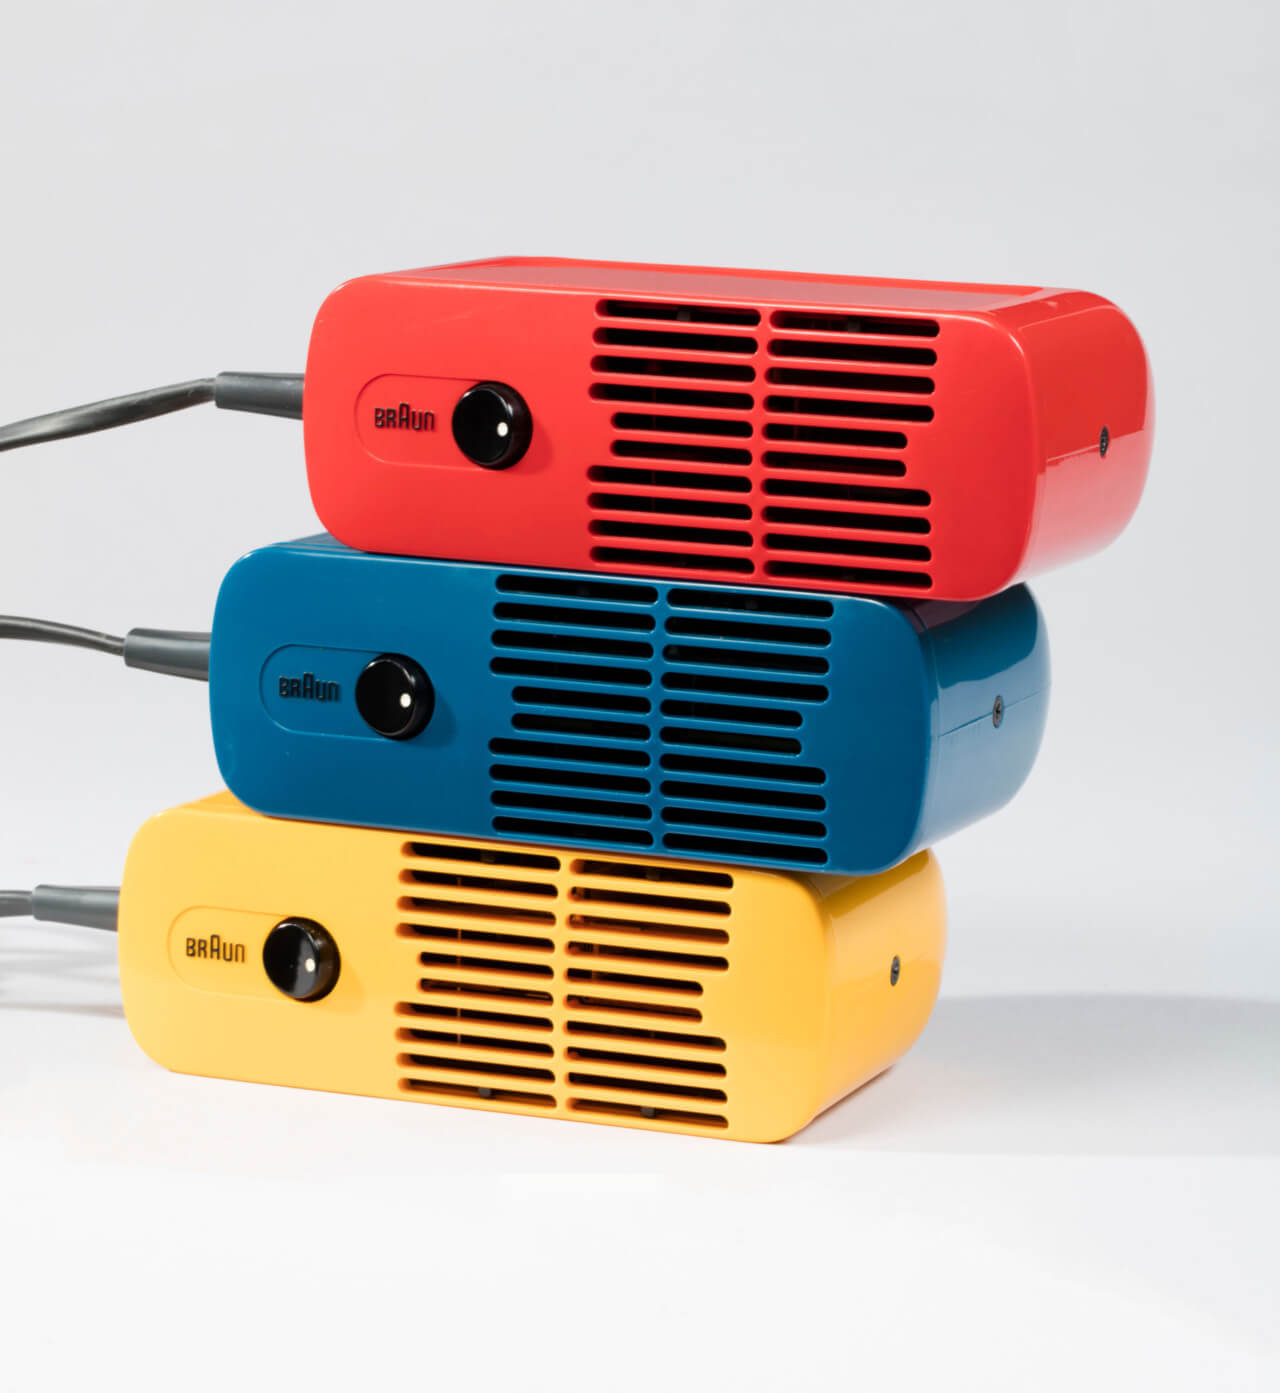 multicolored Braun portable hair dryers by Dieter Rams